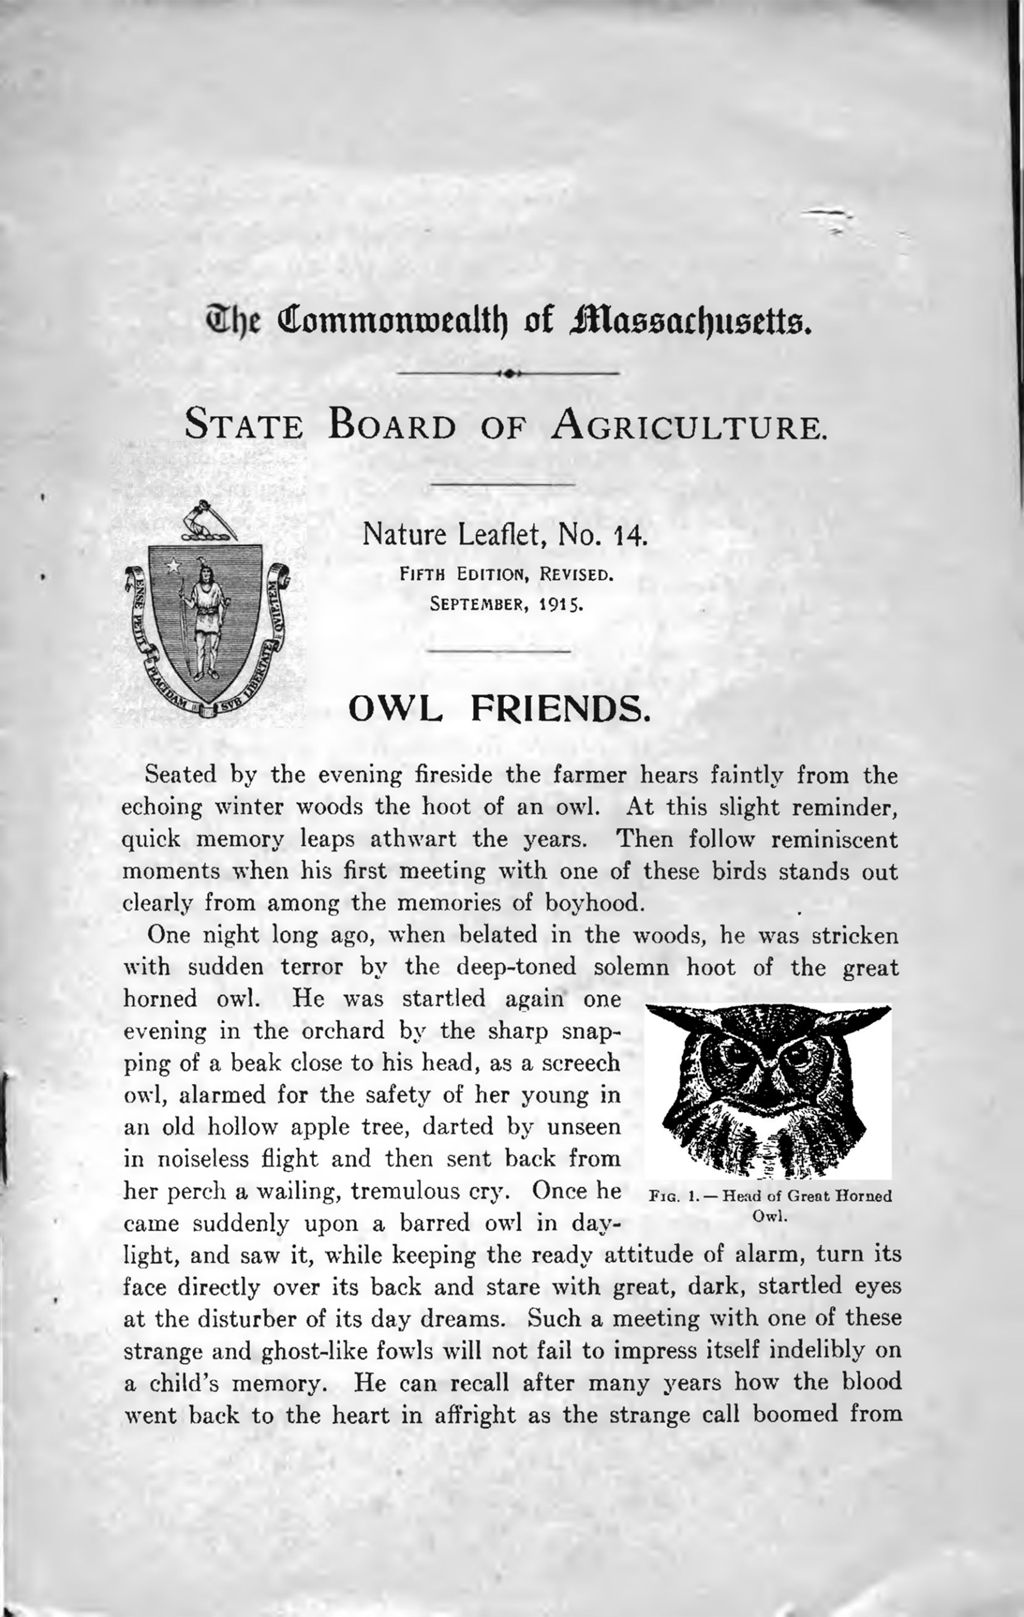 Massachusetts State Board of Agriculture, Nature Leaflet, no. 14, Owl Friends, 1915